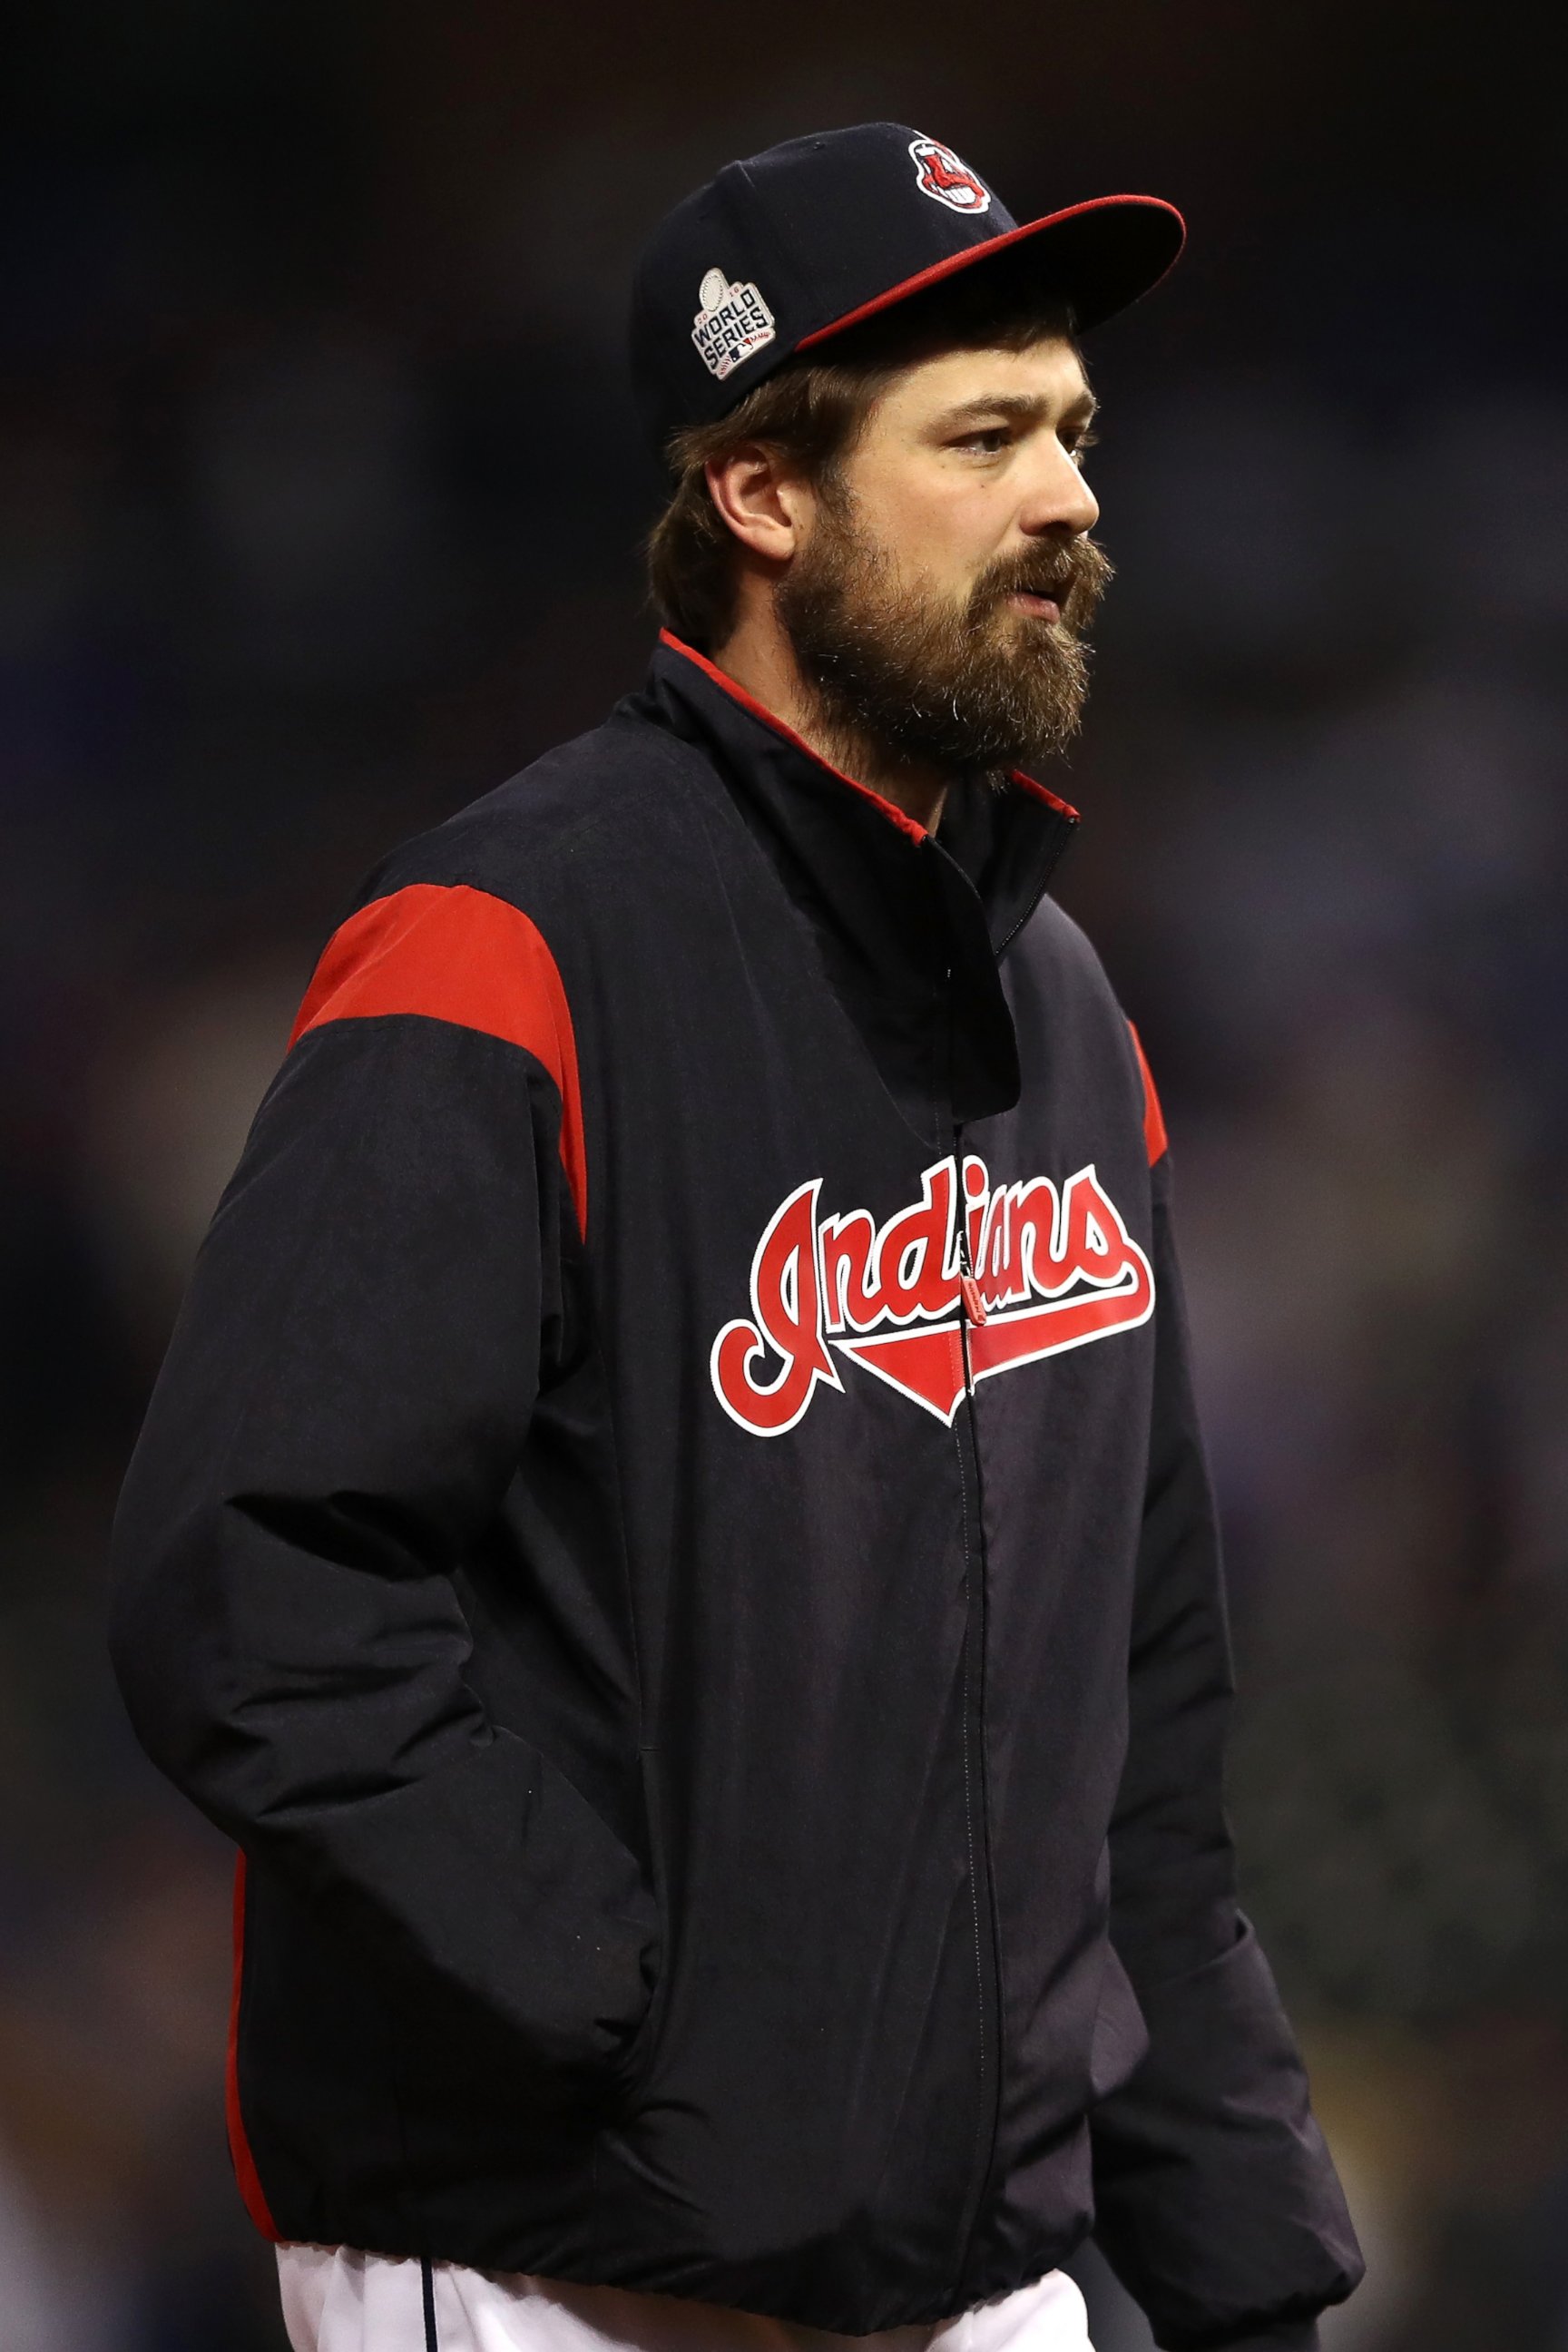 PHOTO: Andrew Miller #24 of the Cleveland Indians reacts after the Chicago Cubs defeated the Cleveland Indians 9-3 to win Game Six of the 2016 World Series at Progressive Field, Nov. 1, 2016 in Cleveland, Ohio.